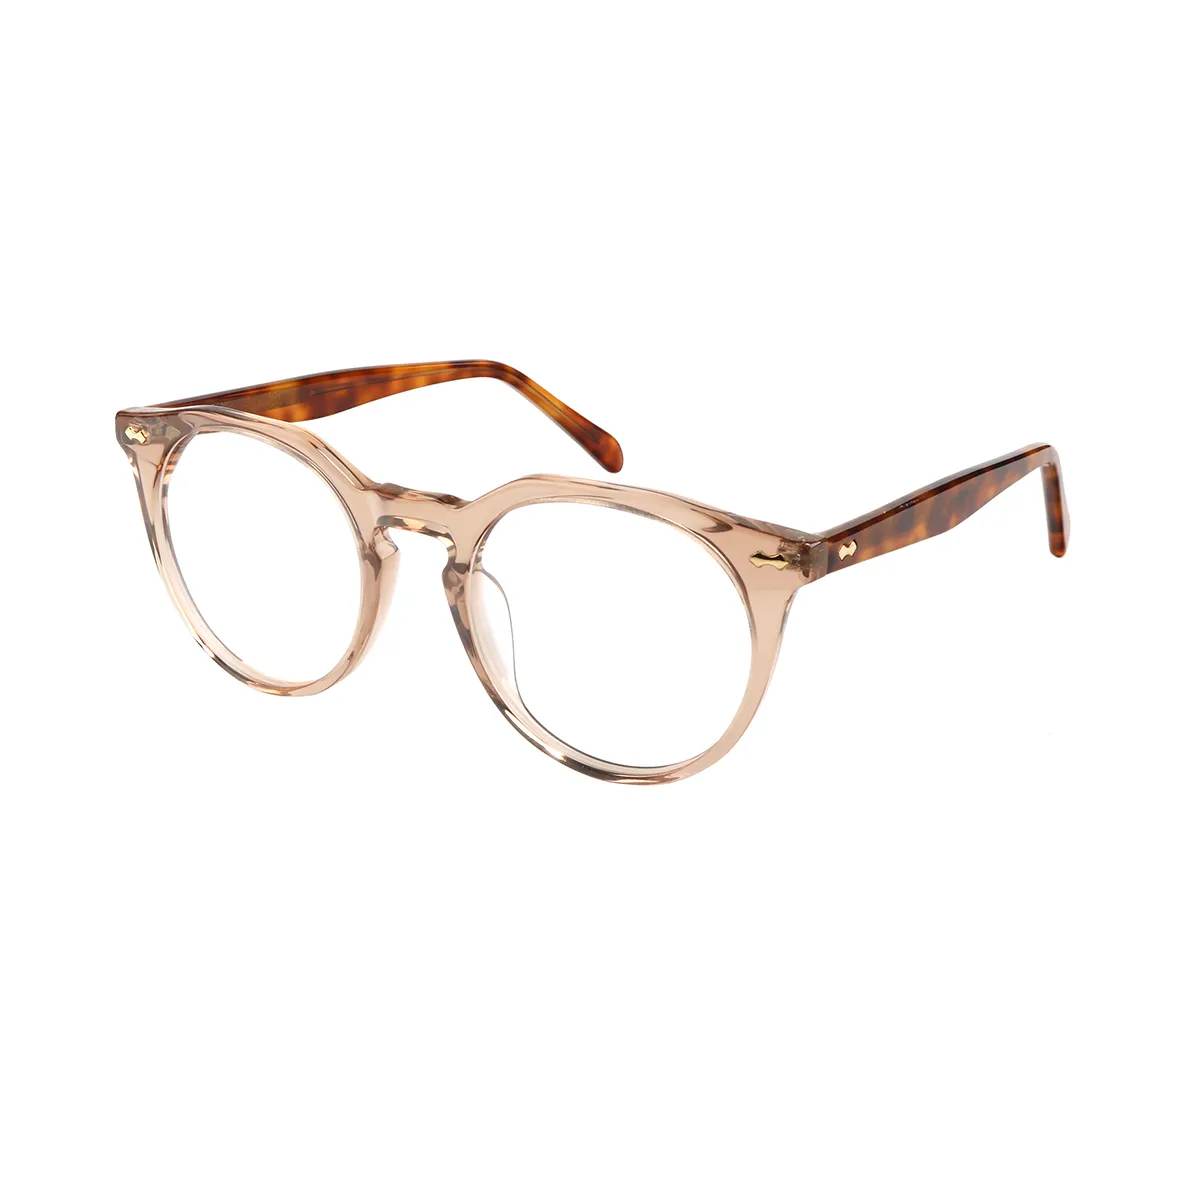 Darcy - Round Brown Glasses for Women